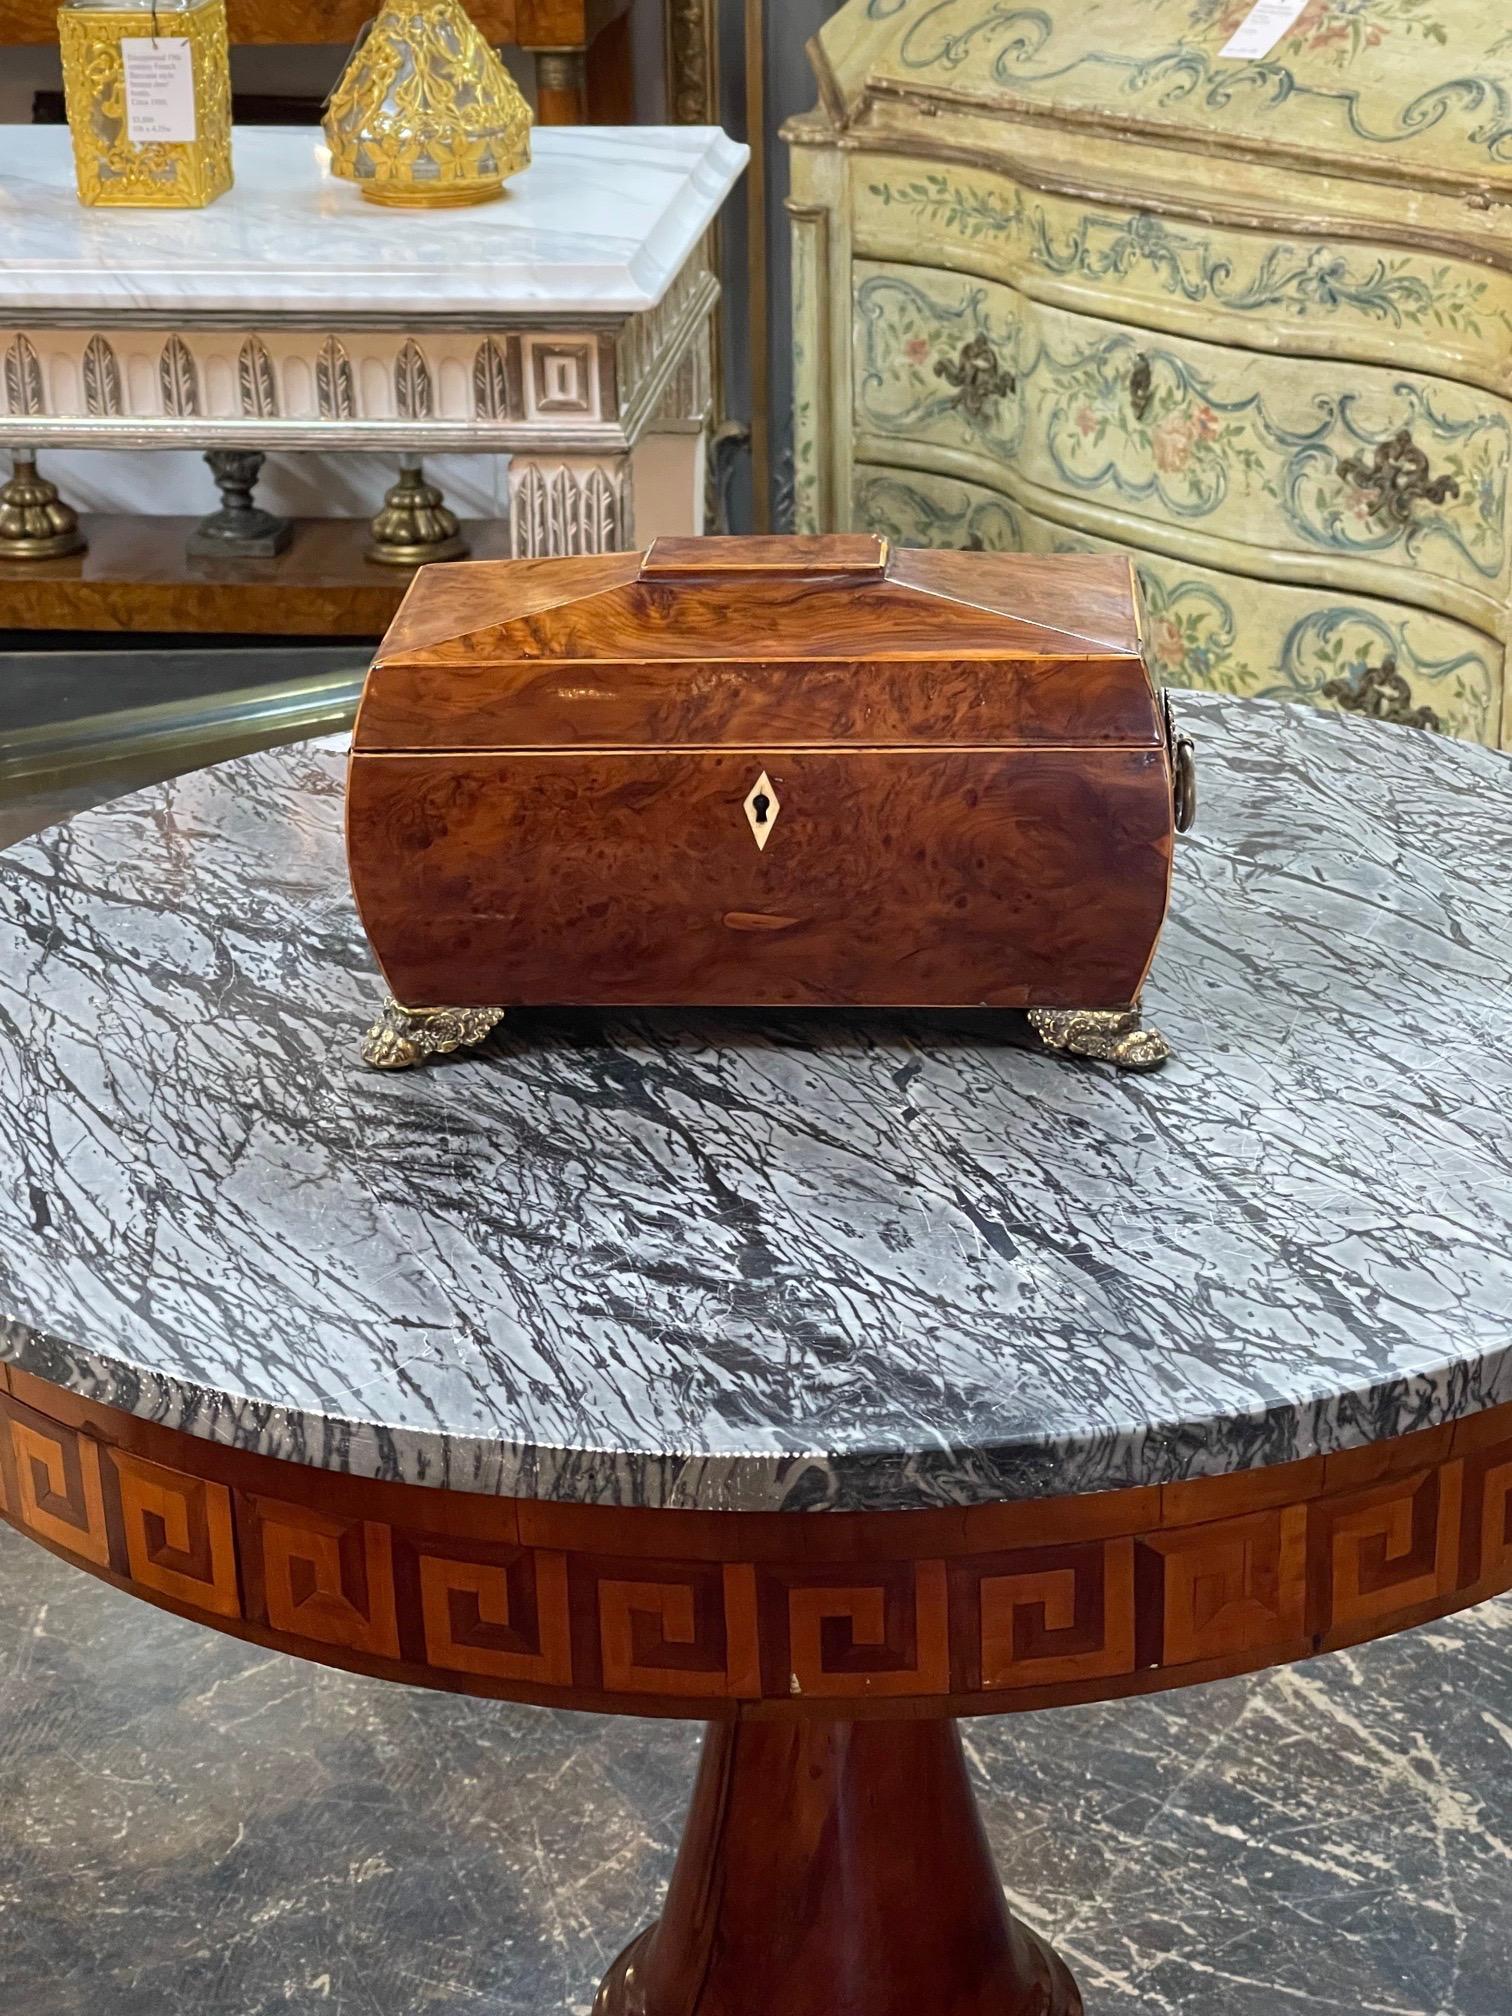 Very fine 19th century English Regency tea caddy. Made of beautiful Burl Walnut with lots of compartments. A great accessory!